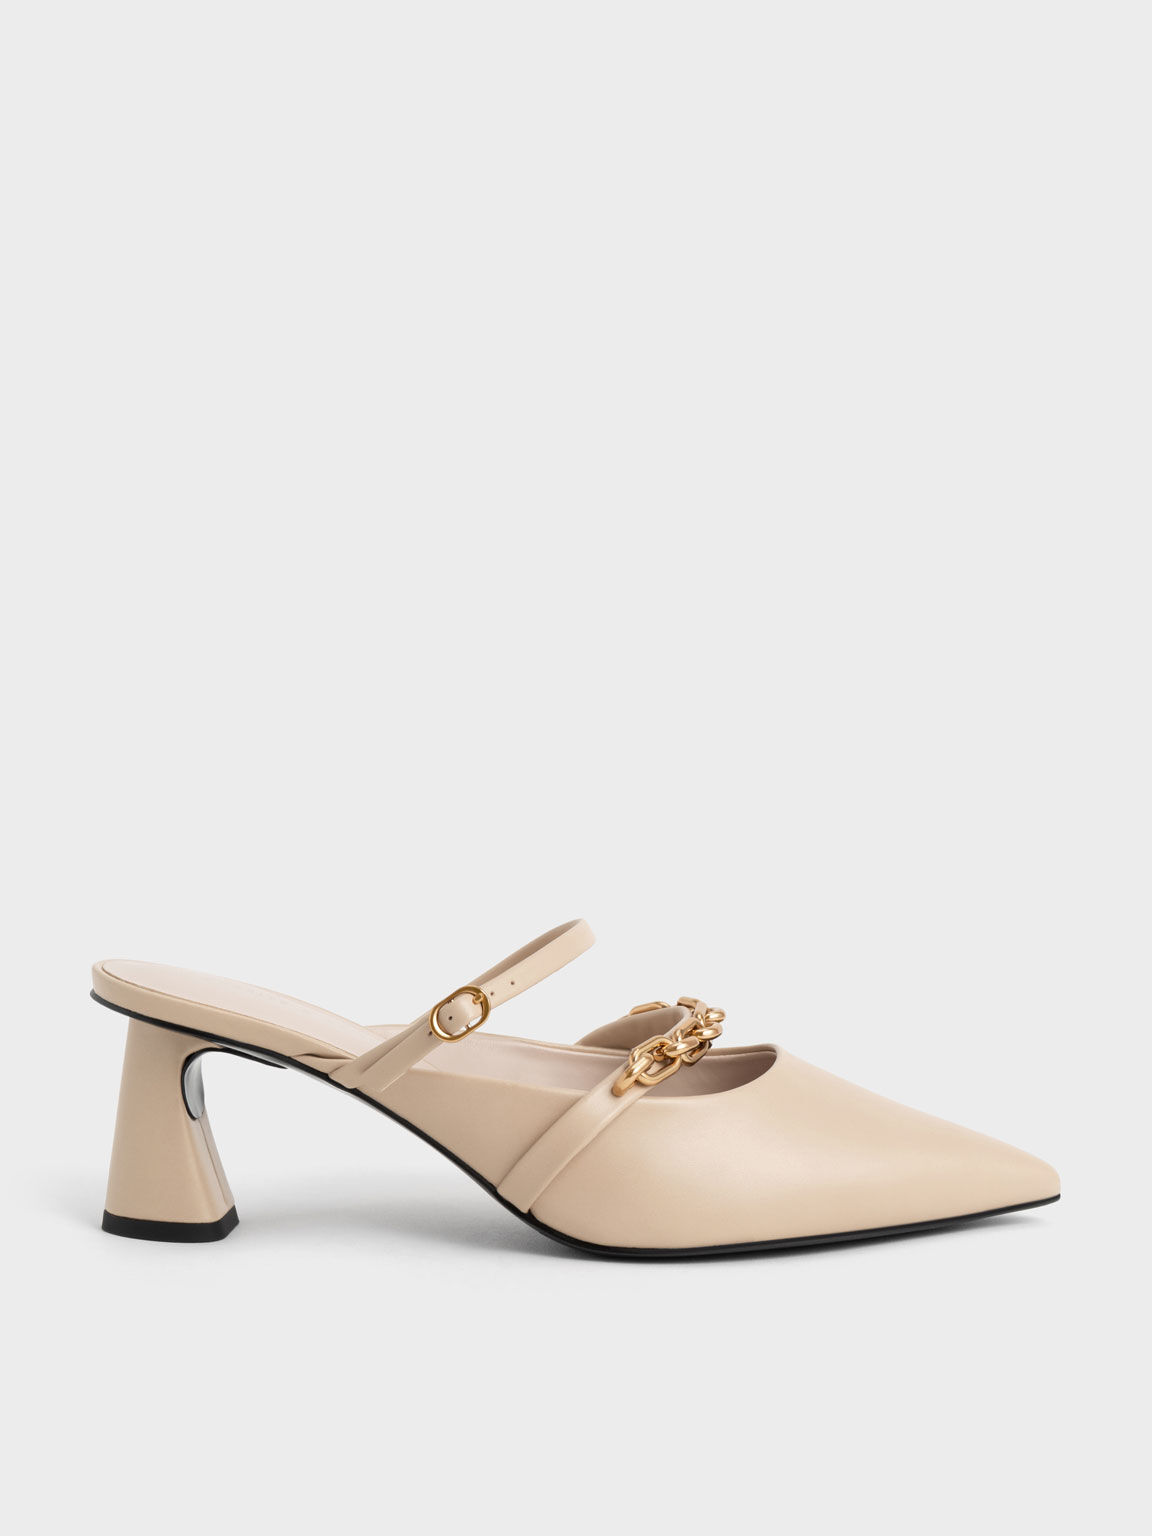 Women's Heels | Shop Exclusive Styles | CHARLES & KEITH SA